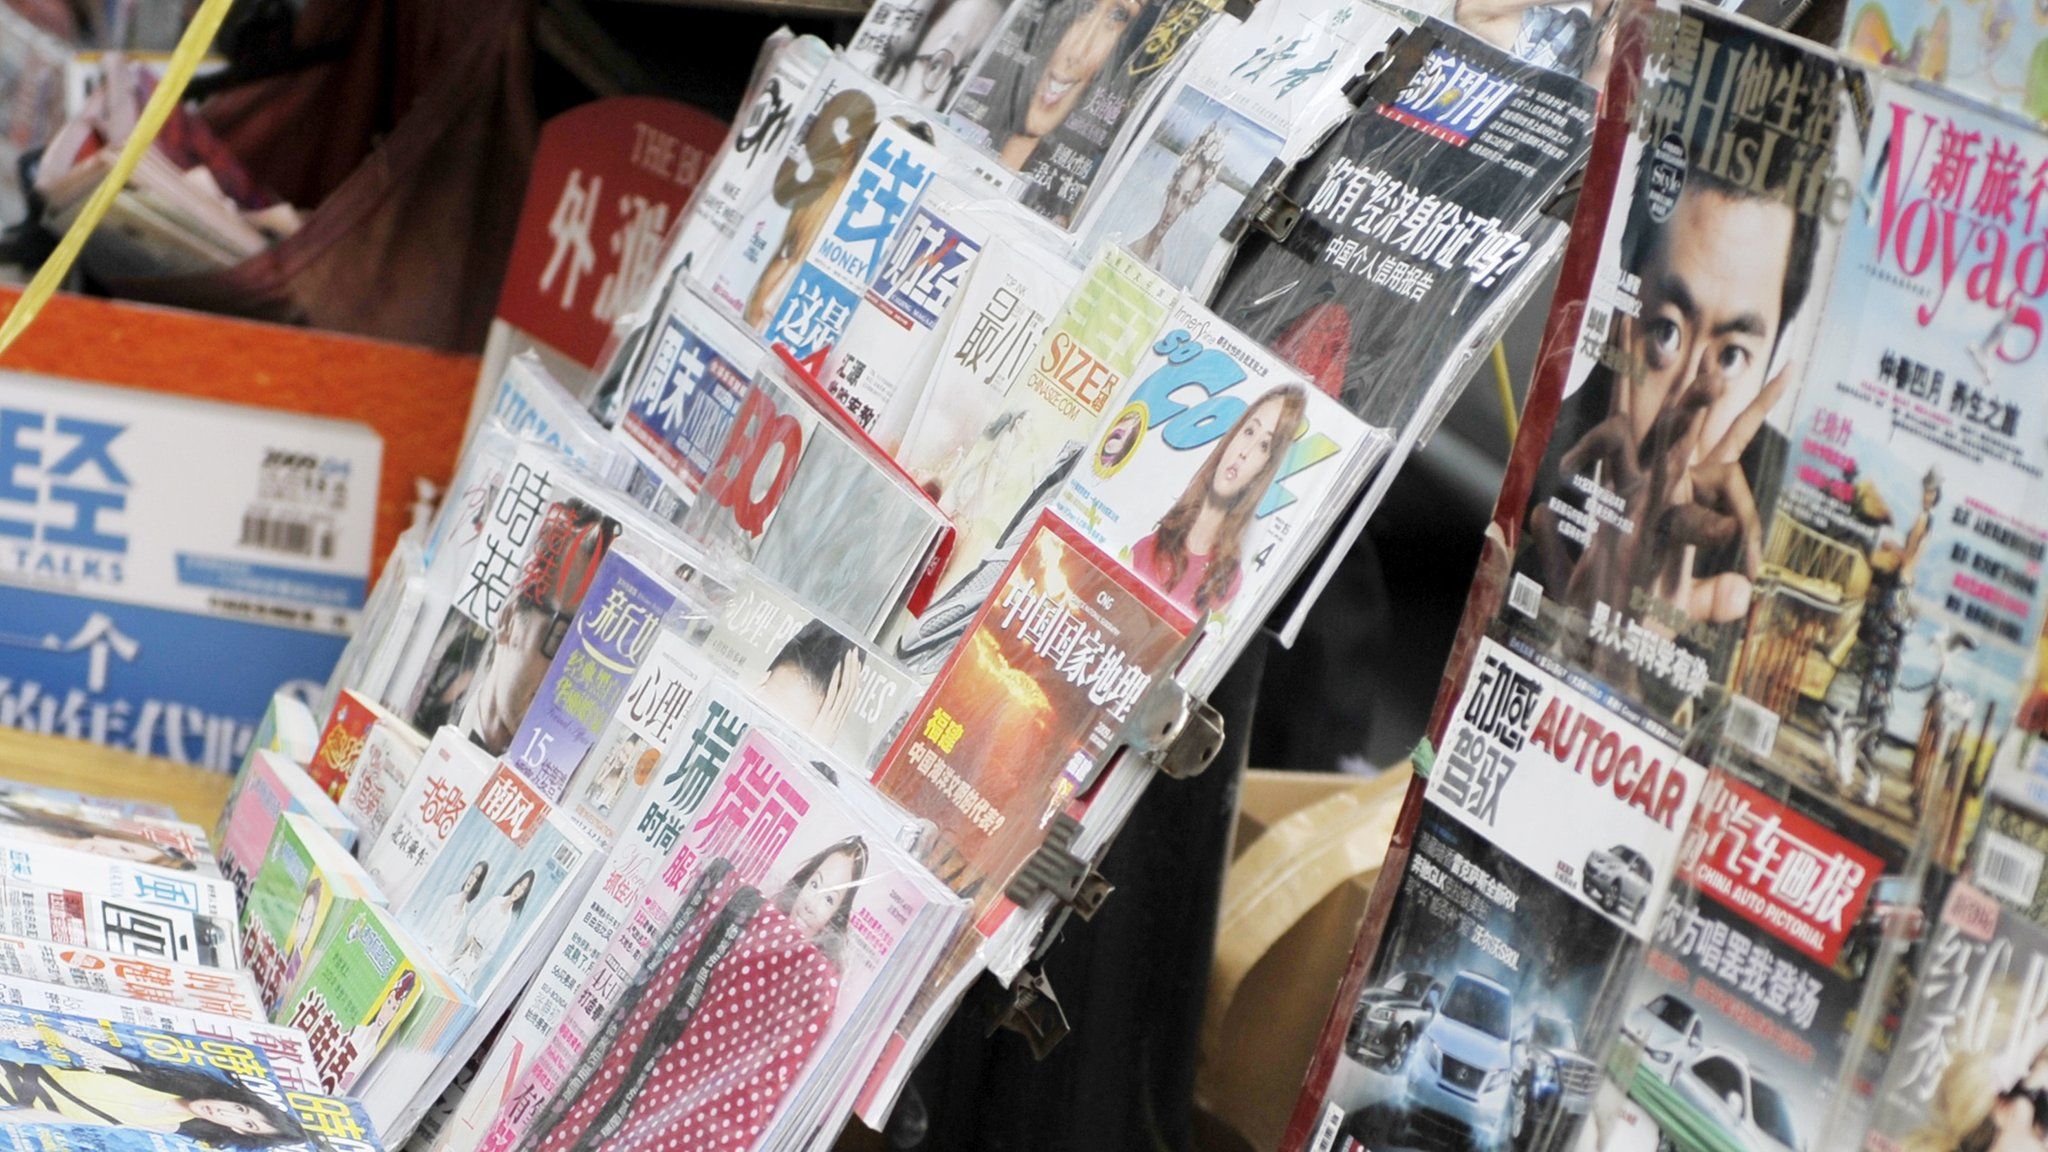 Various newspapers and magazines are seen at a roadside stall in Beijing on April 7, 2009